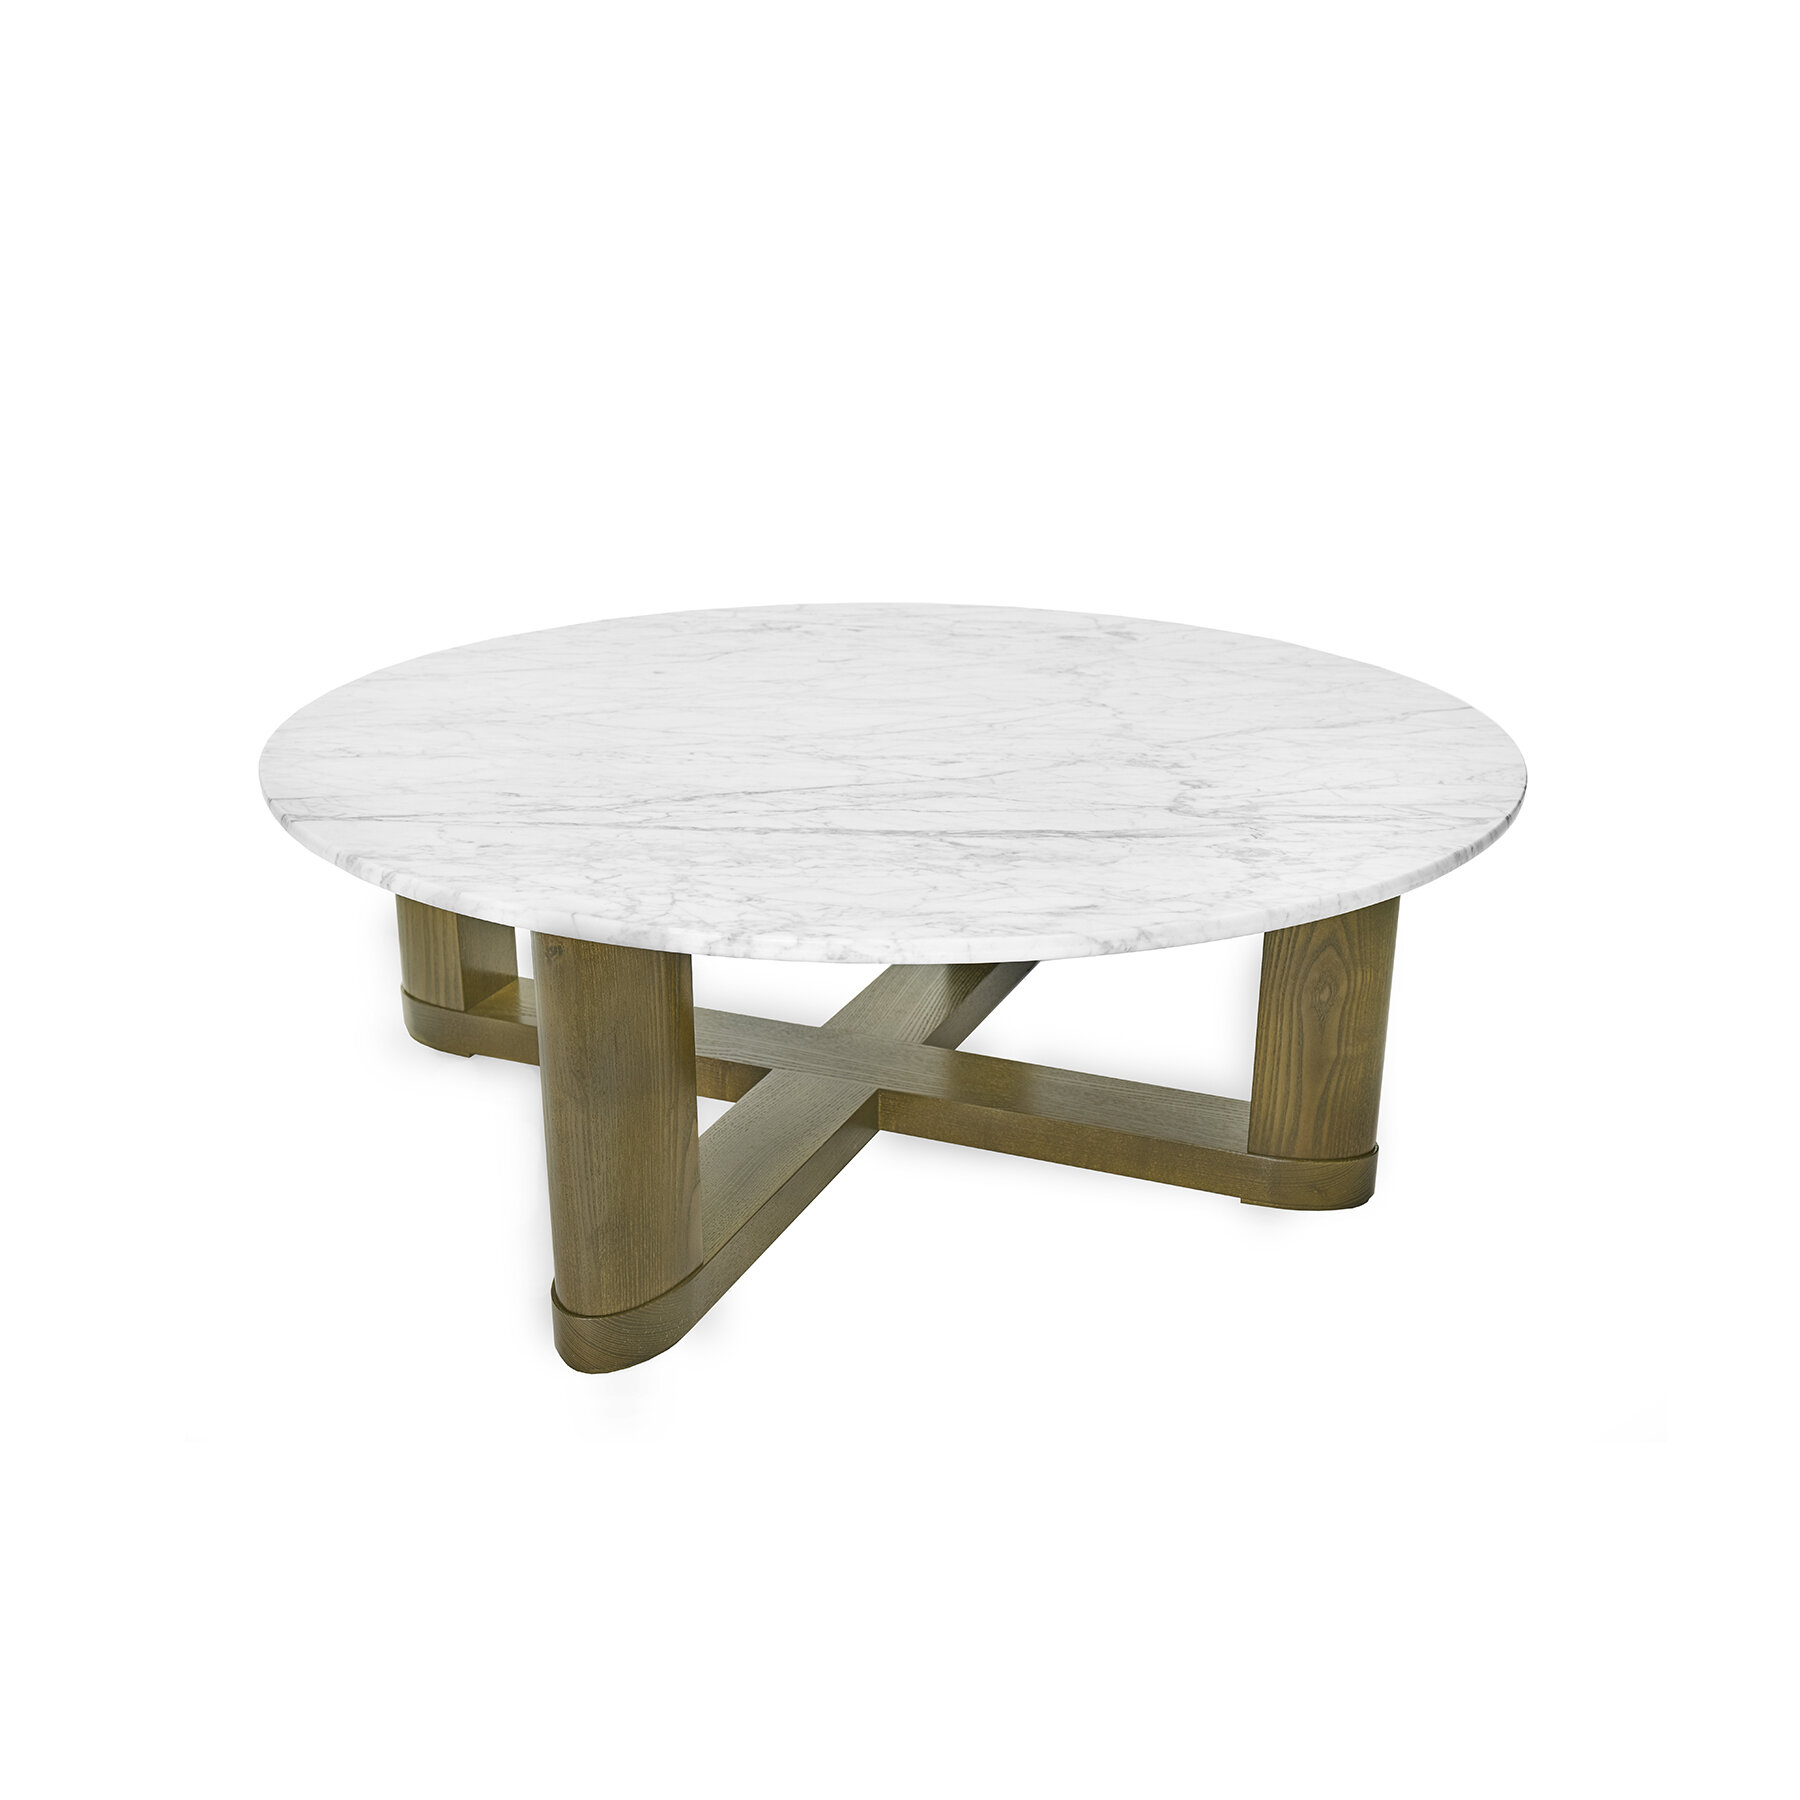 HULL ROUND COFFEE TABLE - $4,179